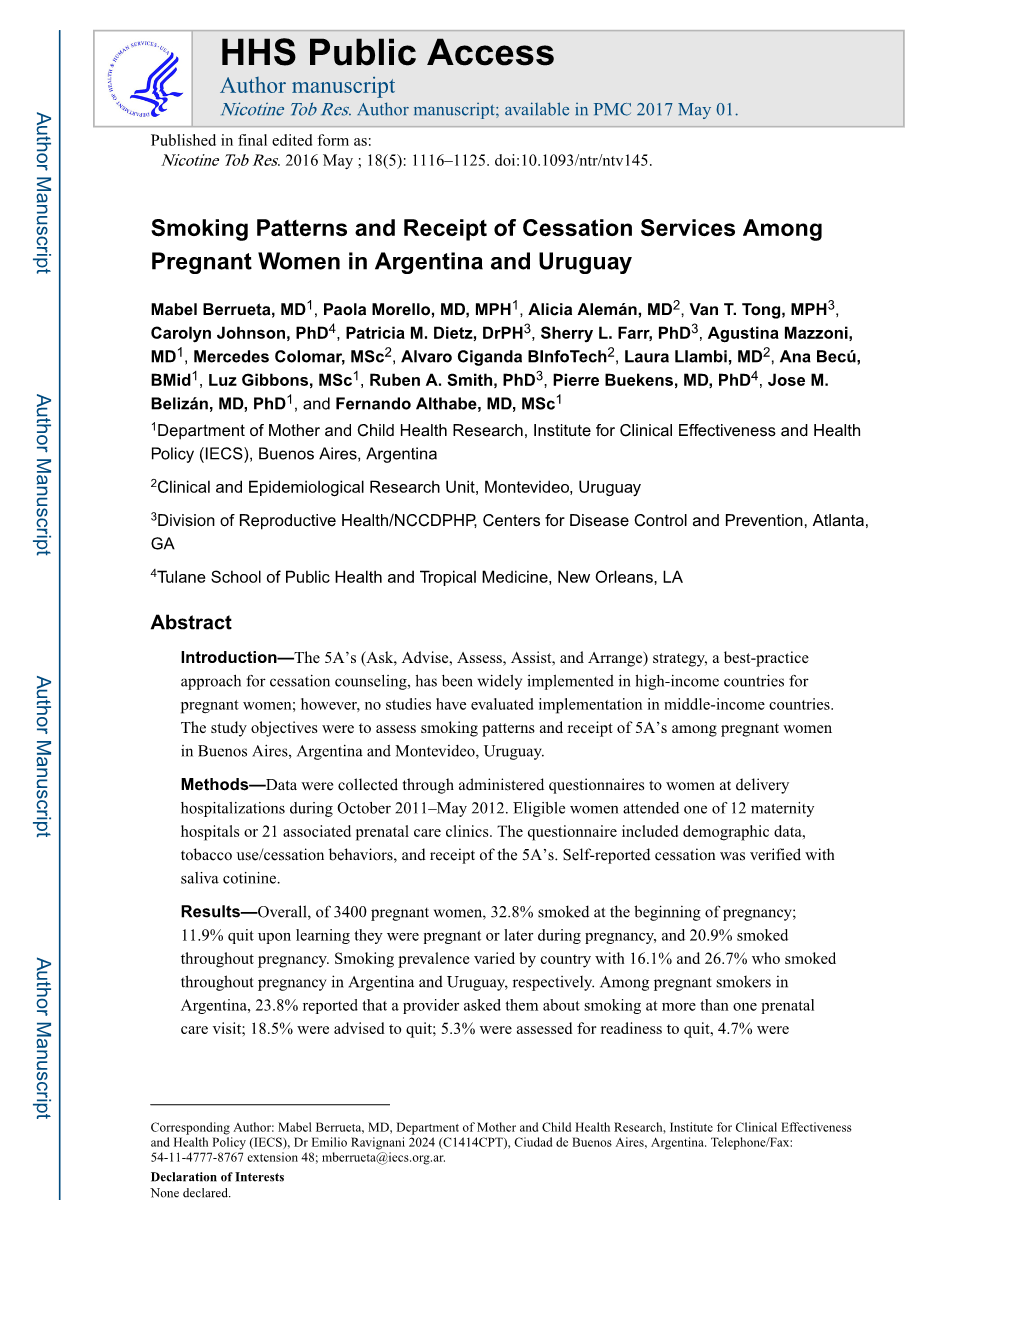 Smoking Patterns and Receipt of Cessation Services Among Pregnant Women in Argentina and Uruguay